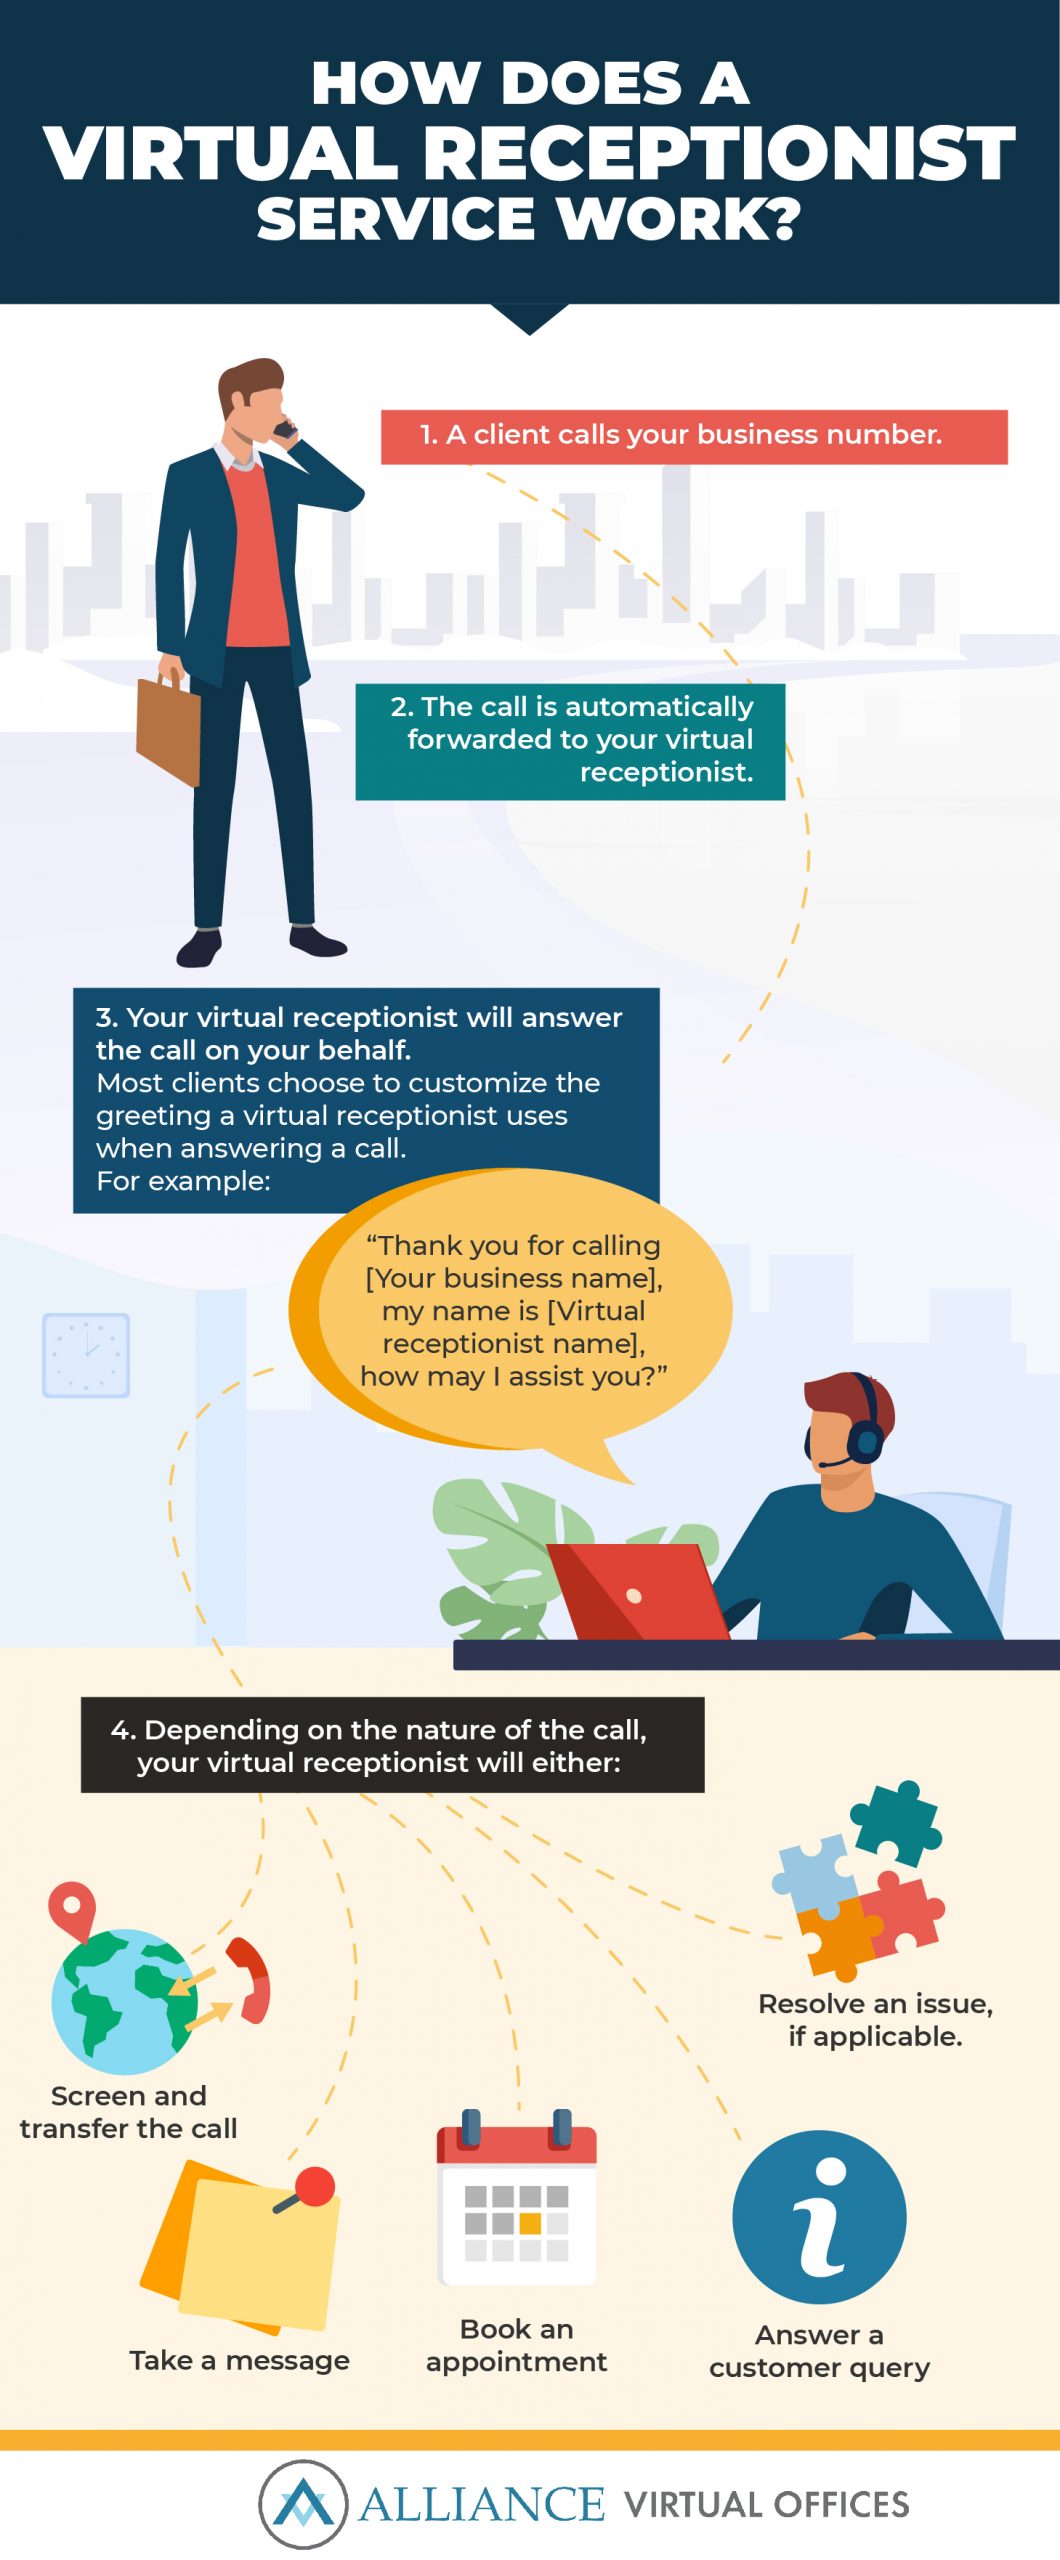 How Does a Virtual Receptionist Service Work? infographic